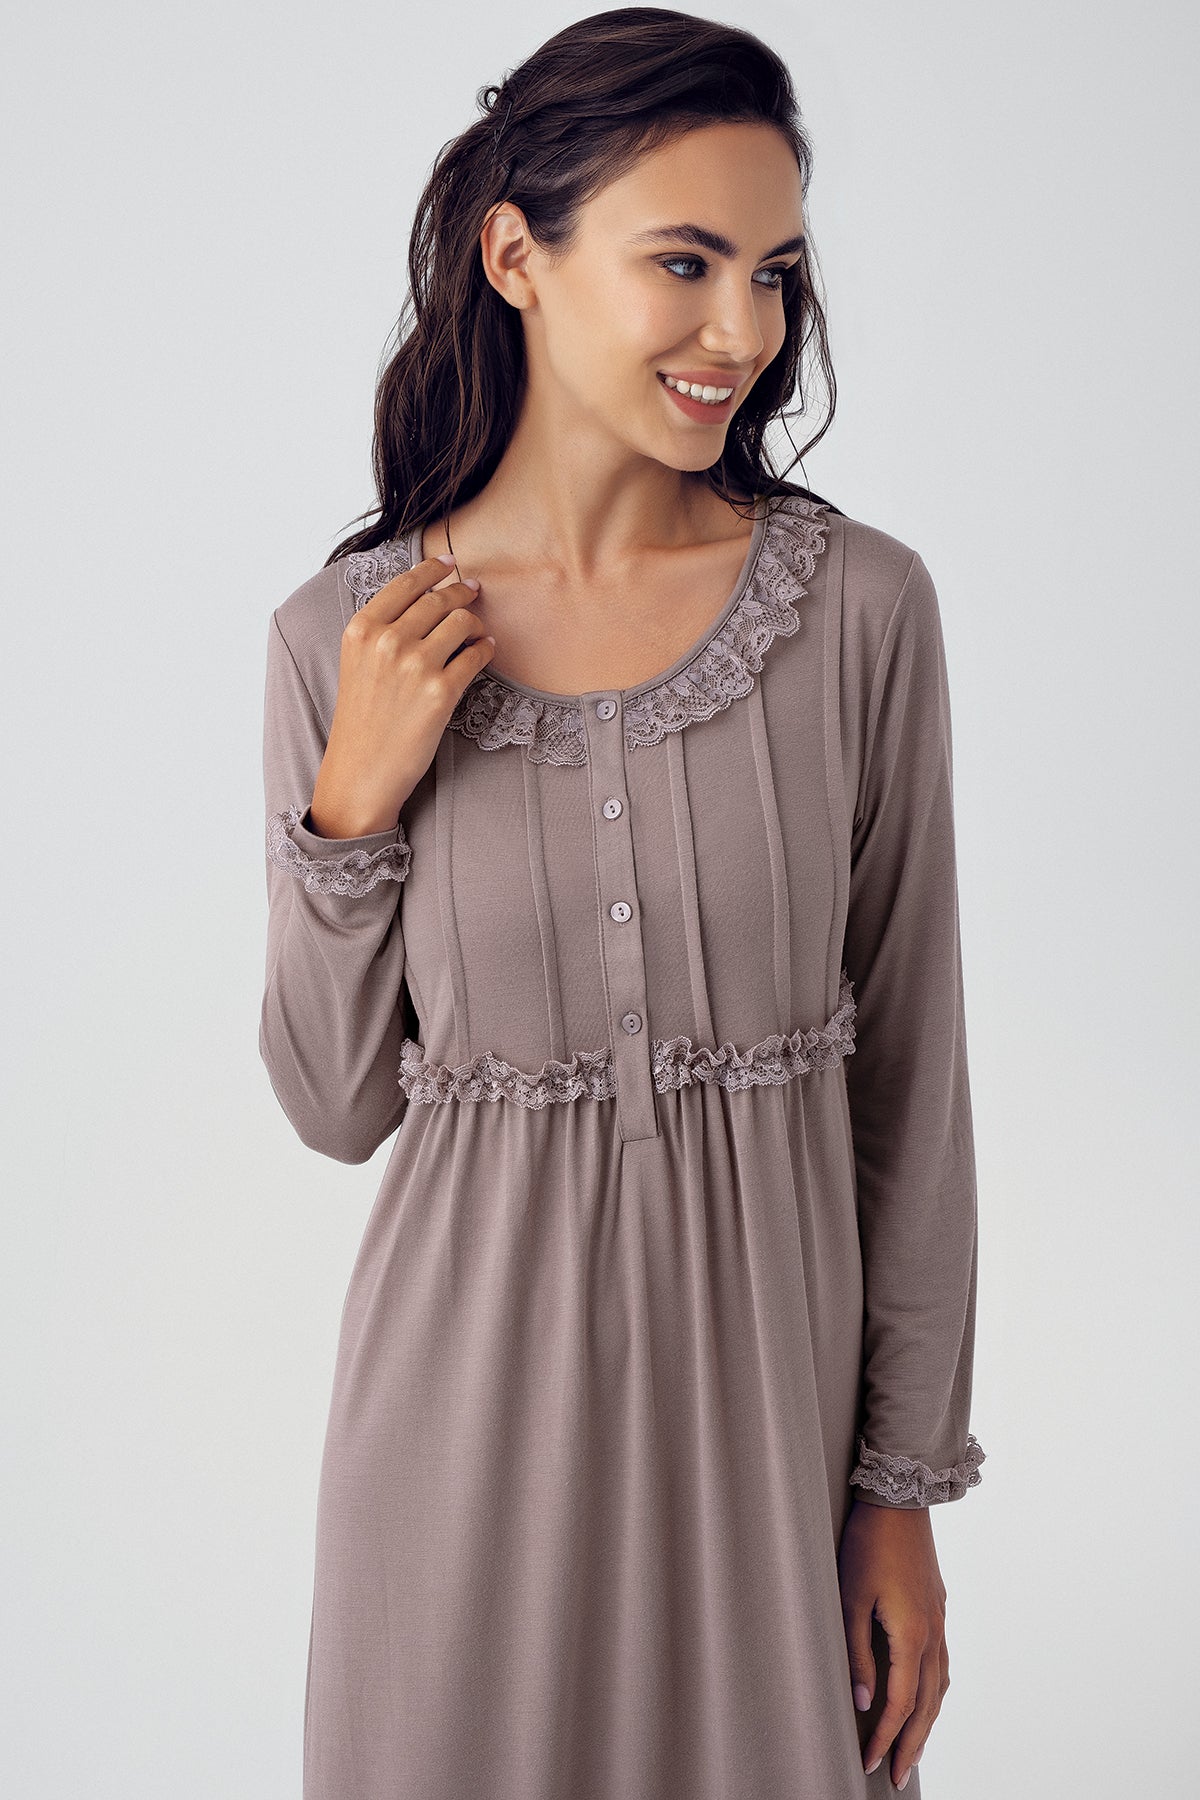 Shopymommy 15121 Guipure Collar Plus Size Maternity & Nursing Nightgown Coffee